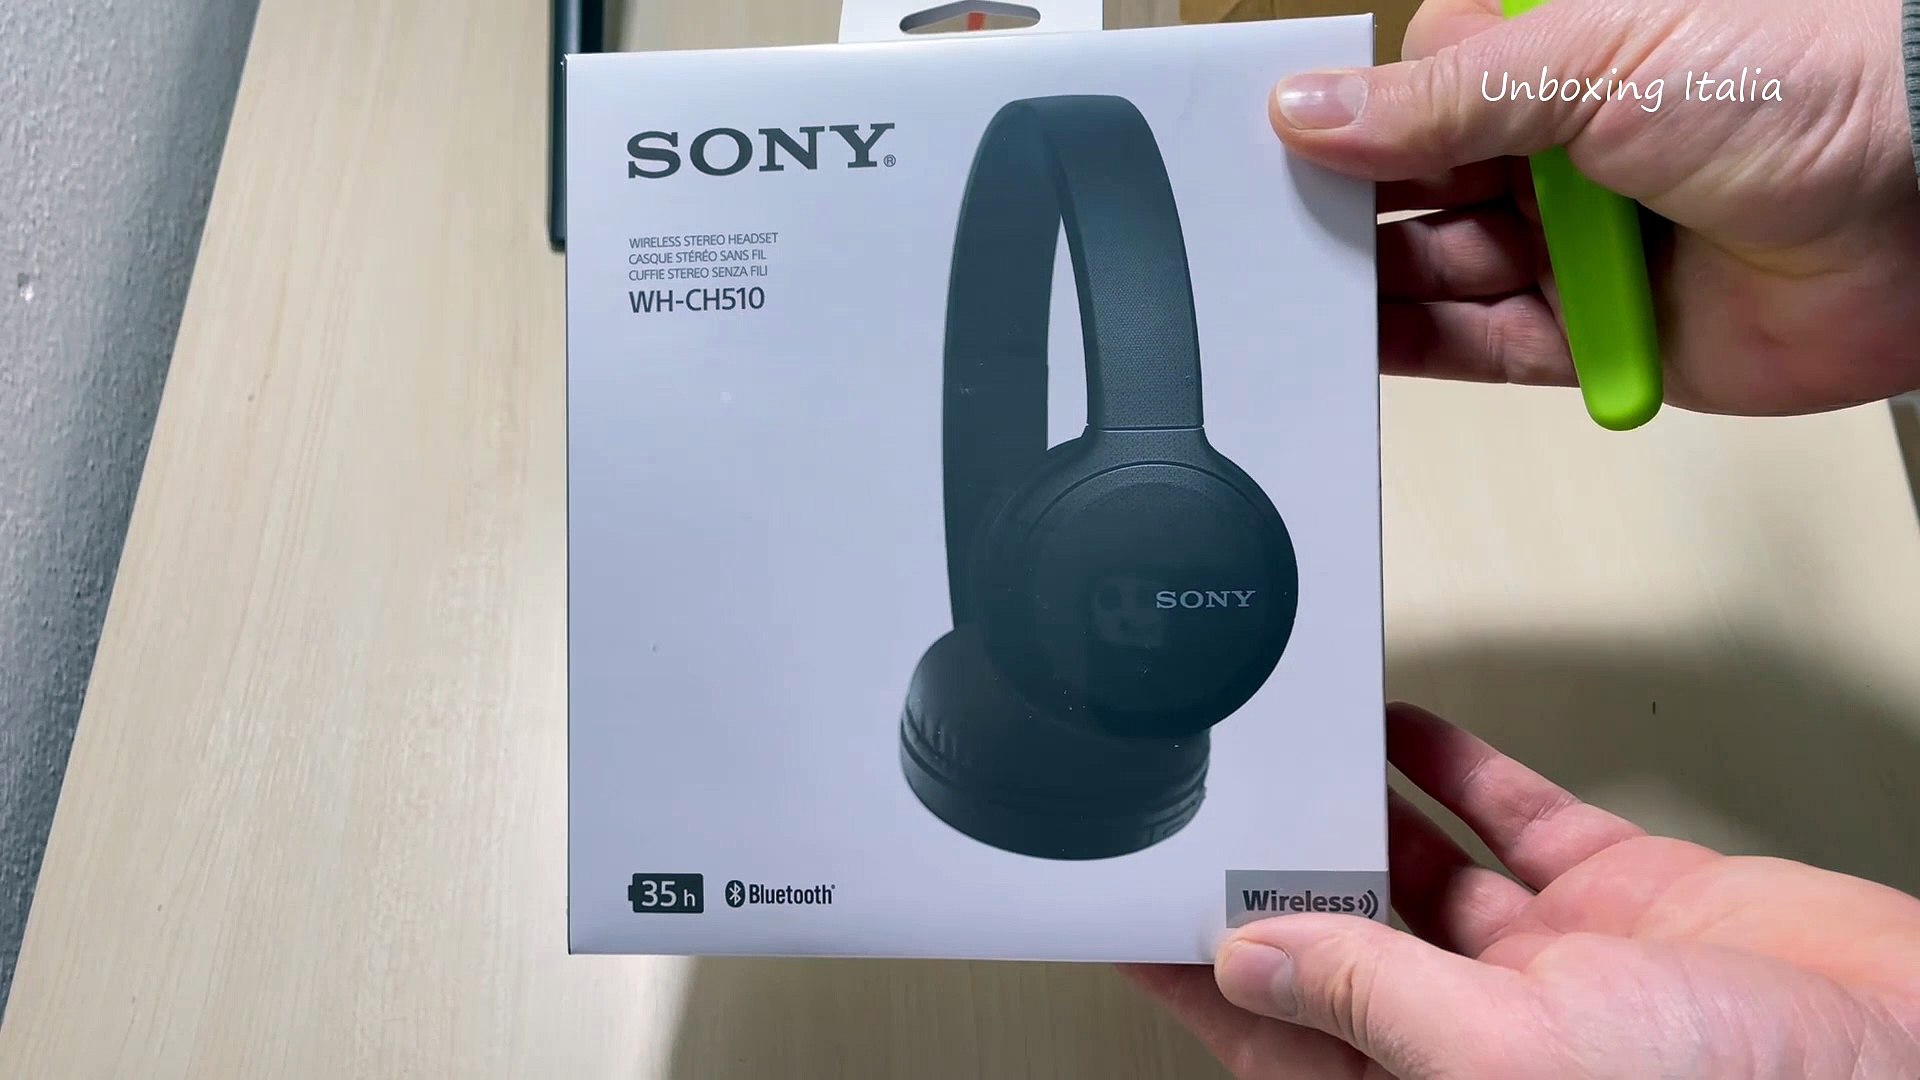 Unboxing cuffie bluetooth Sony WH-CH510 Unboxing Italia - Video Dailymotion